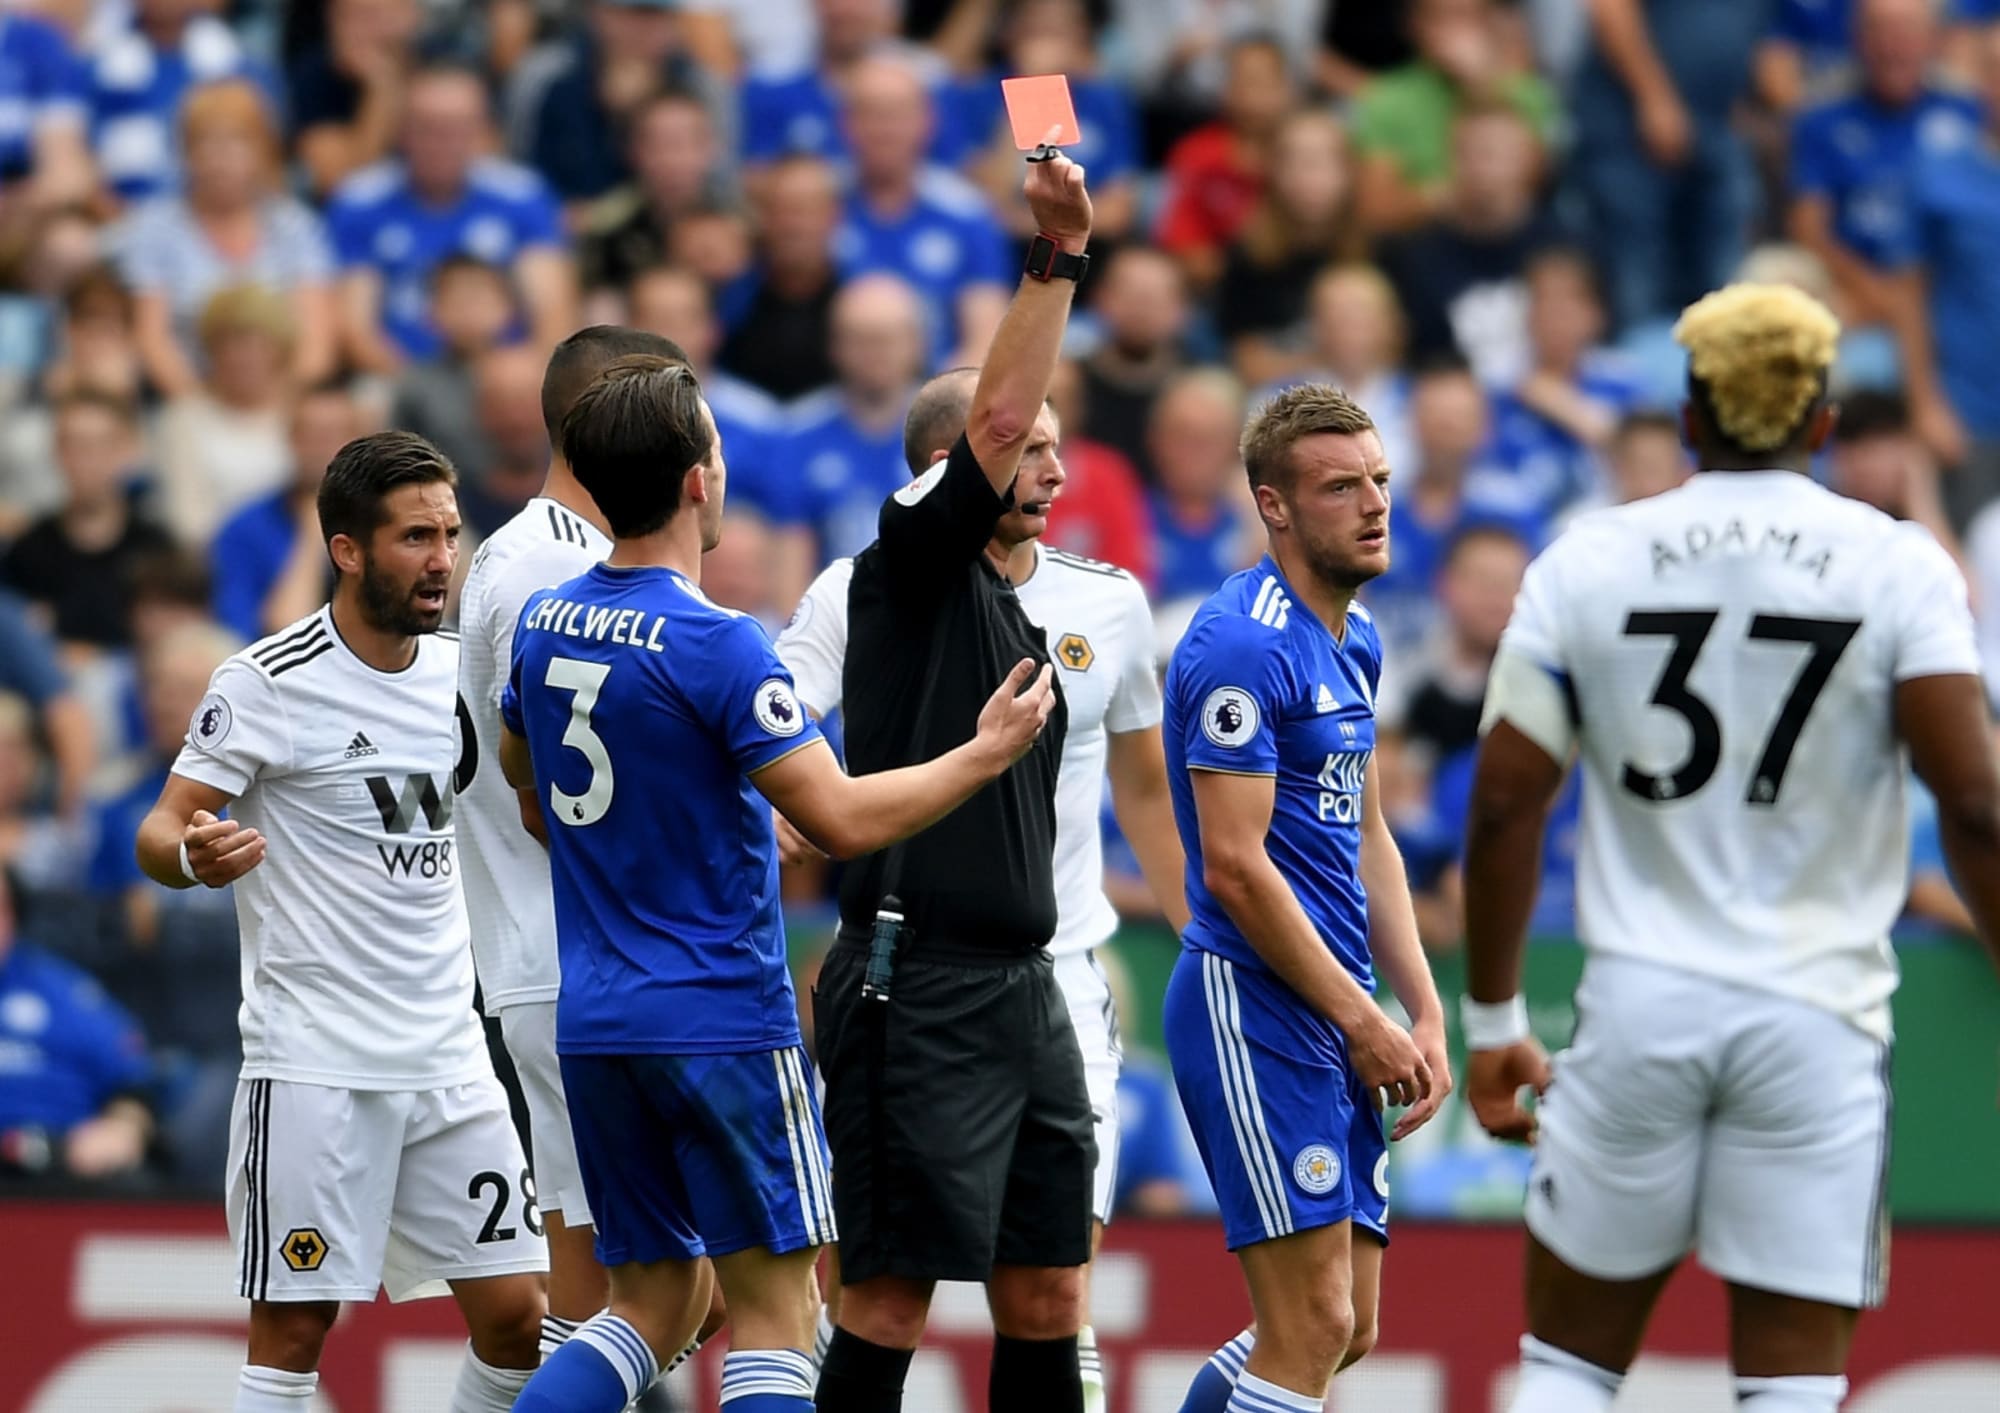 Leicester City's Jamie deserved a red card - and here